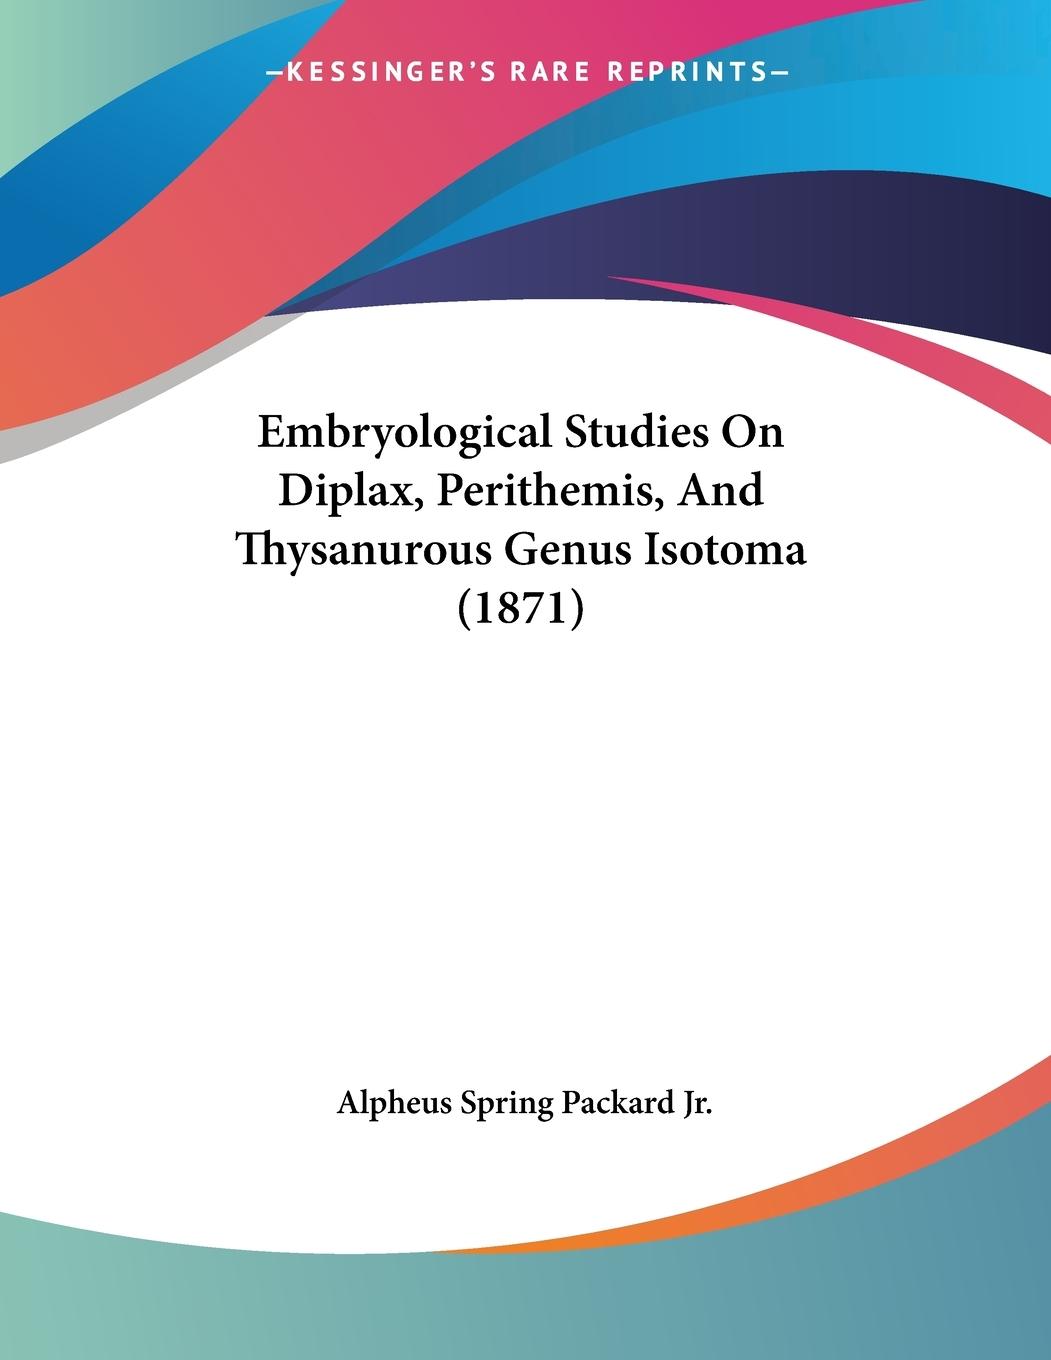 Embryological Studies On Diplax, Perithemis, And Thysanurous Genus Isotoma (1871) - Packard Jr., Alpheus Spring